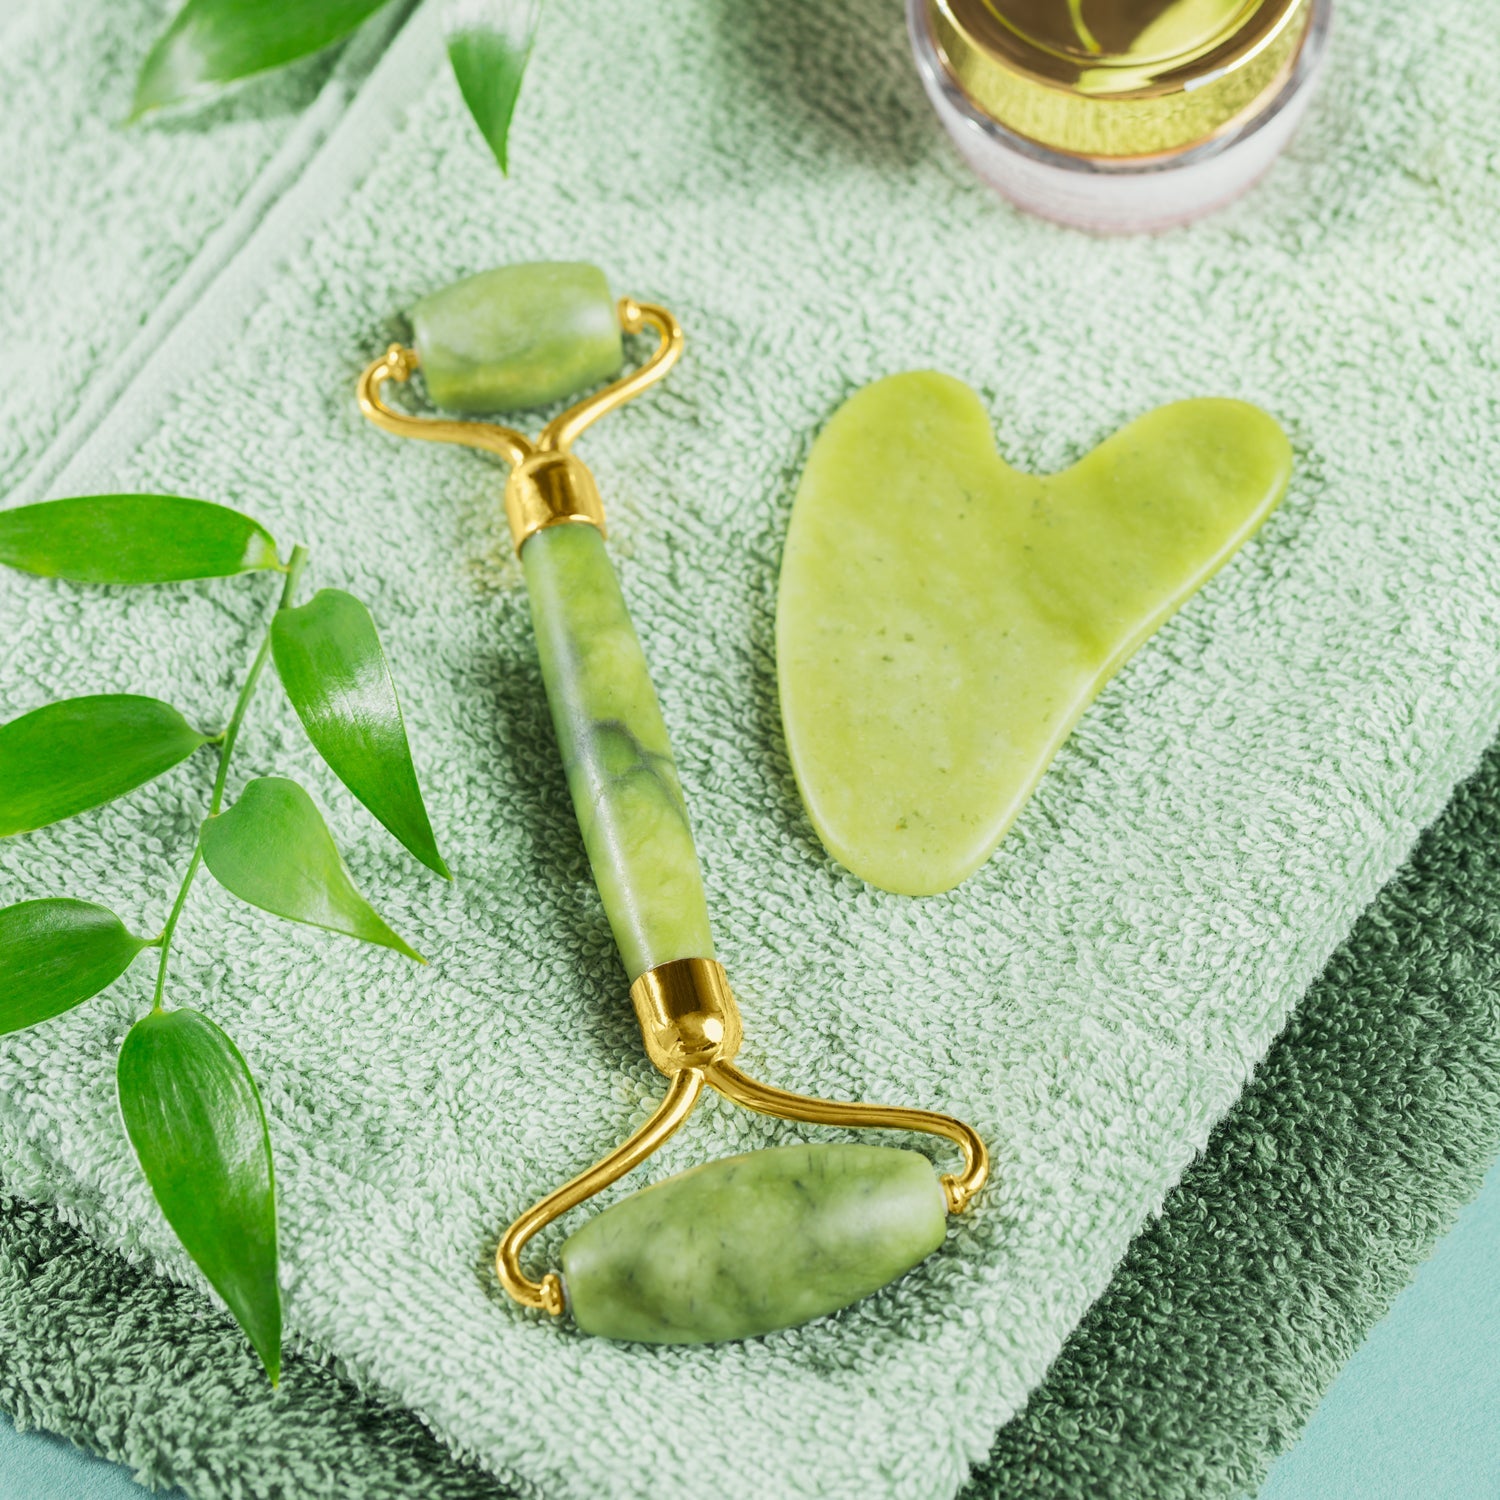 0318 Gua Sha Stone and Anti Aging Jade Roller Massager for Face Massage Natural Face Skincare Massager & Face Roller Massager for Women | Face Shaper Jade Roller and Gua Sha Set for Glowing Skin